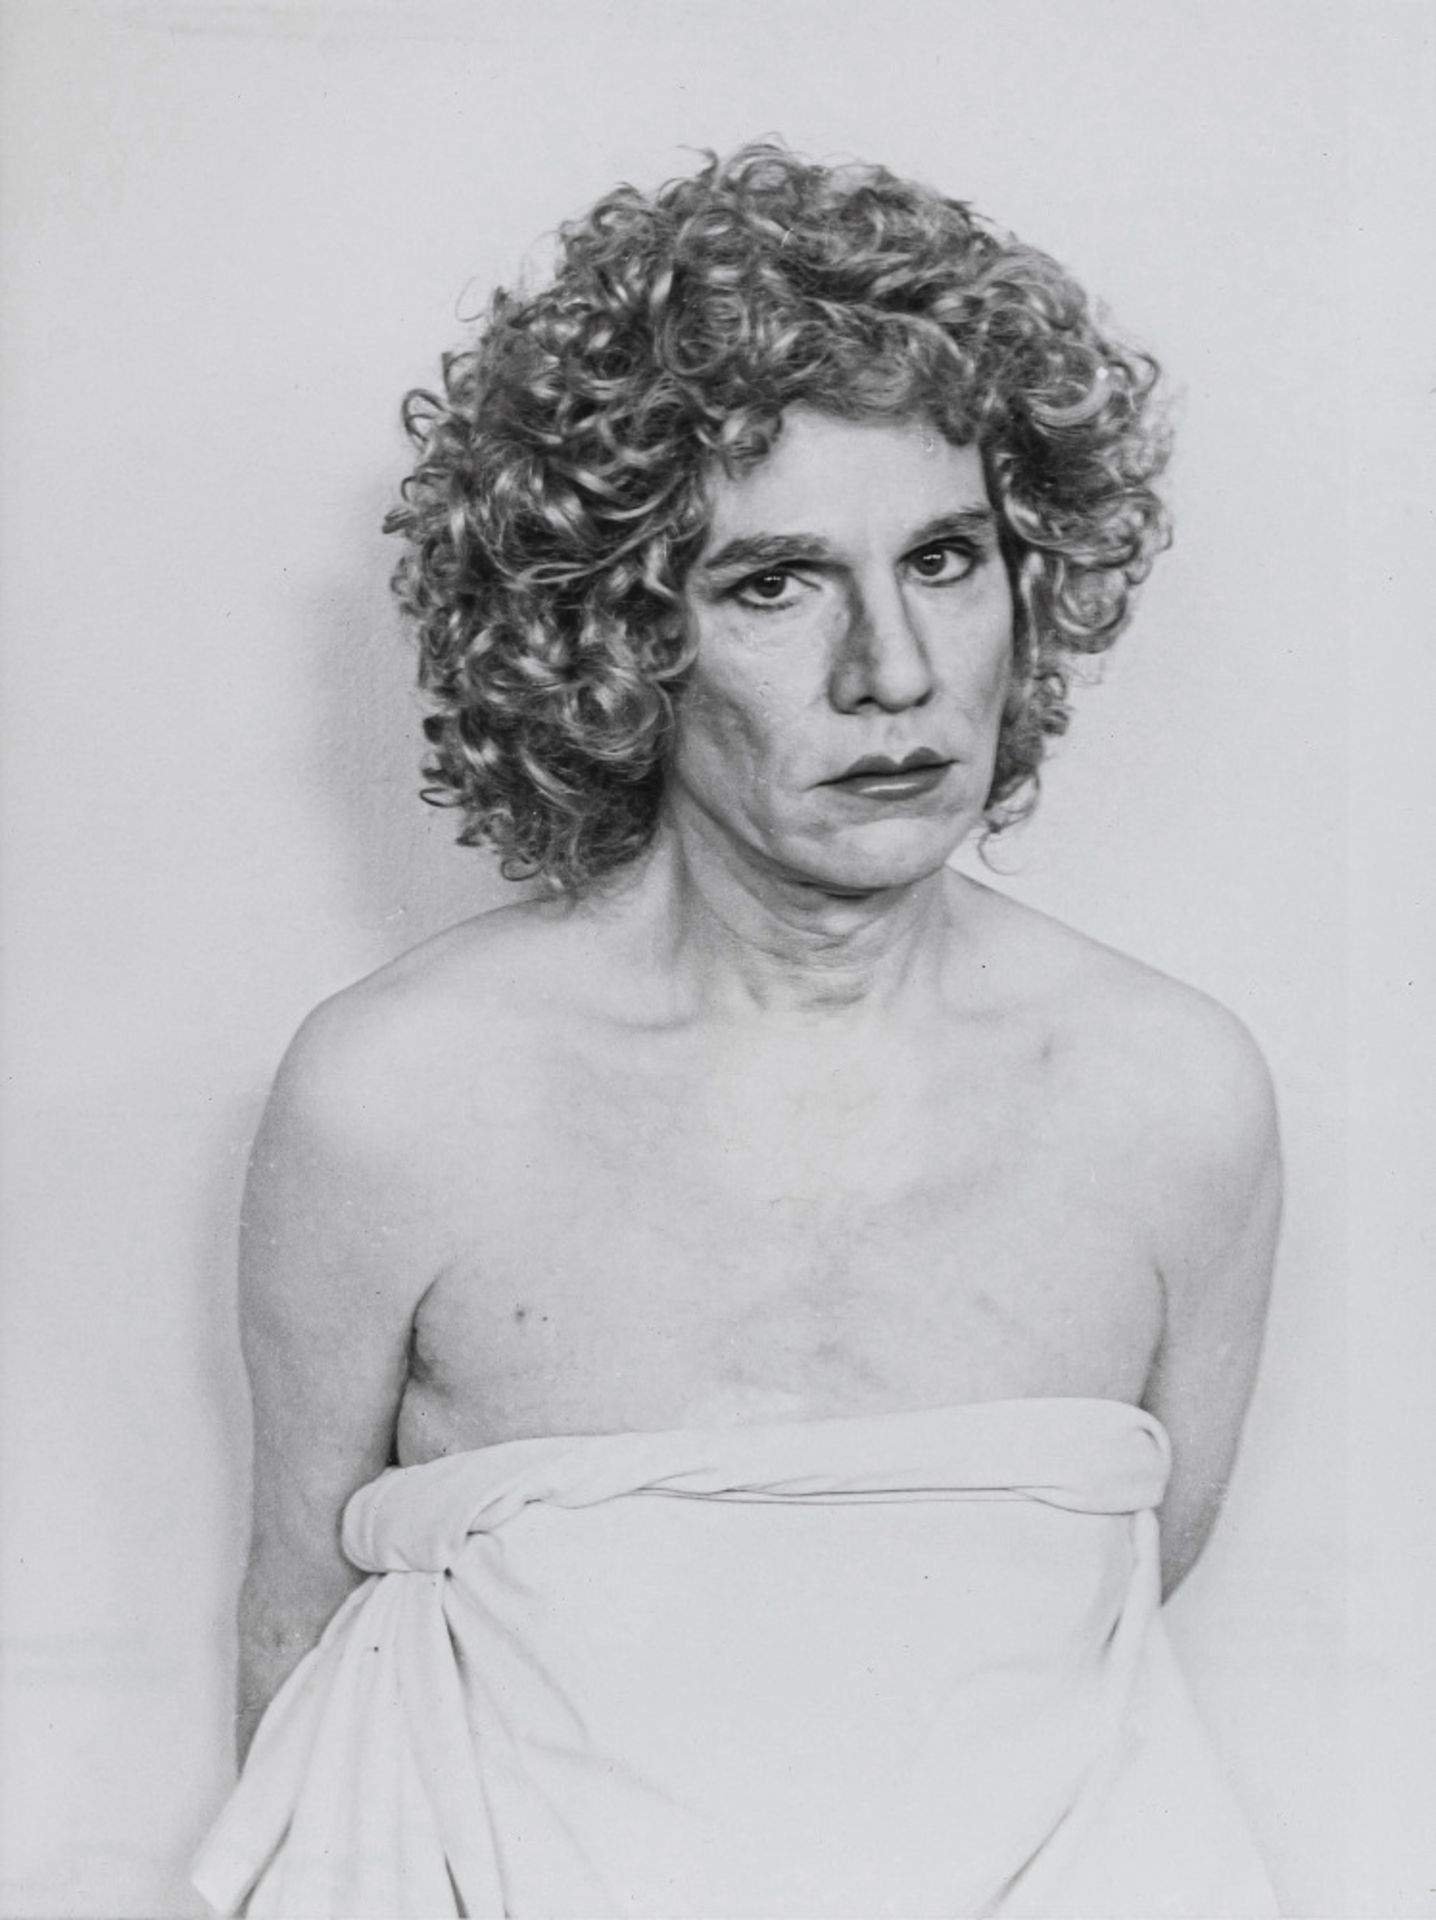 Christopher Makos - Andy Warhol with 6 different wigs from the Altered Images series. 1981/2001 - Image 4 of 7